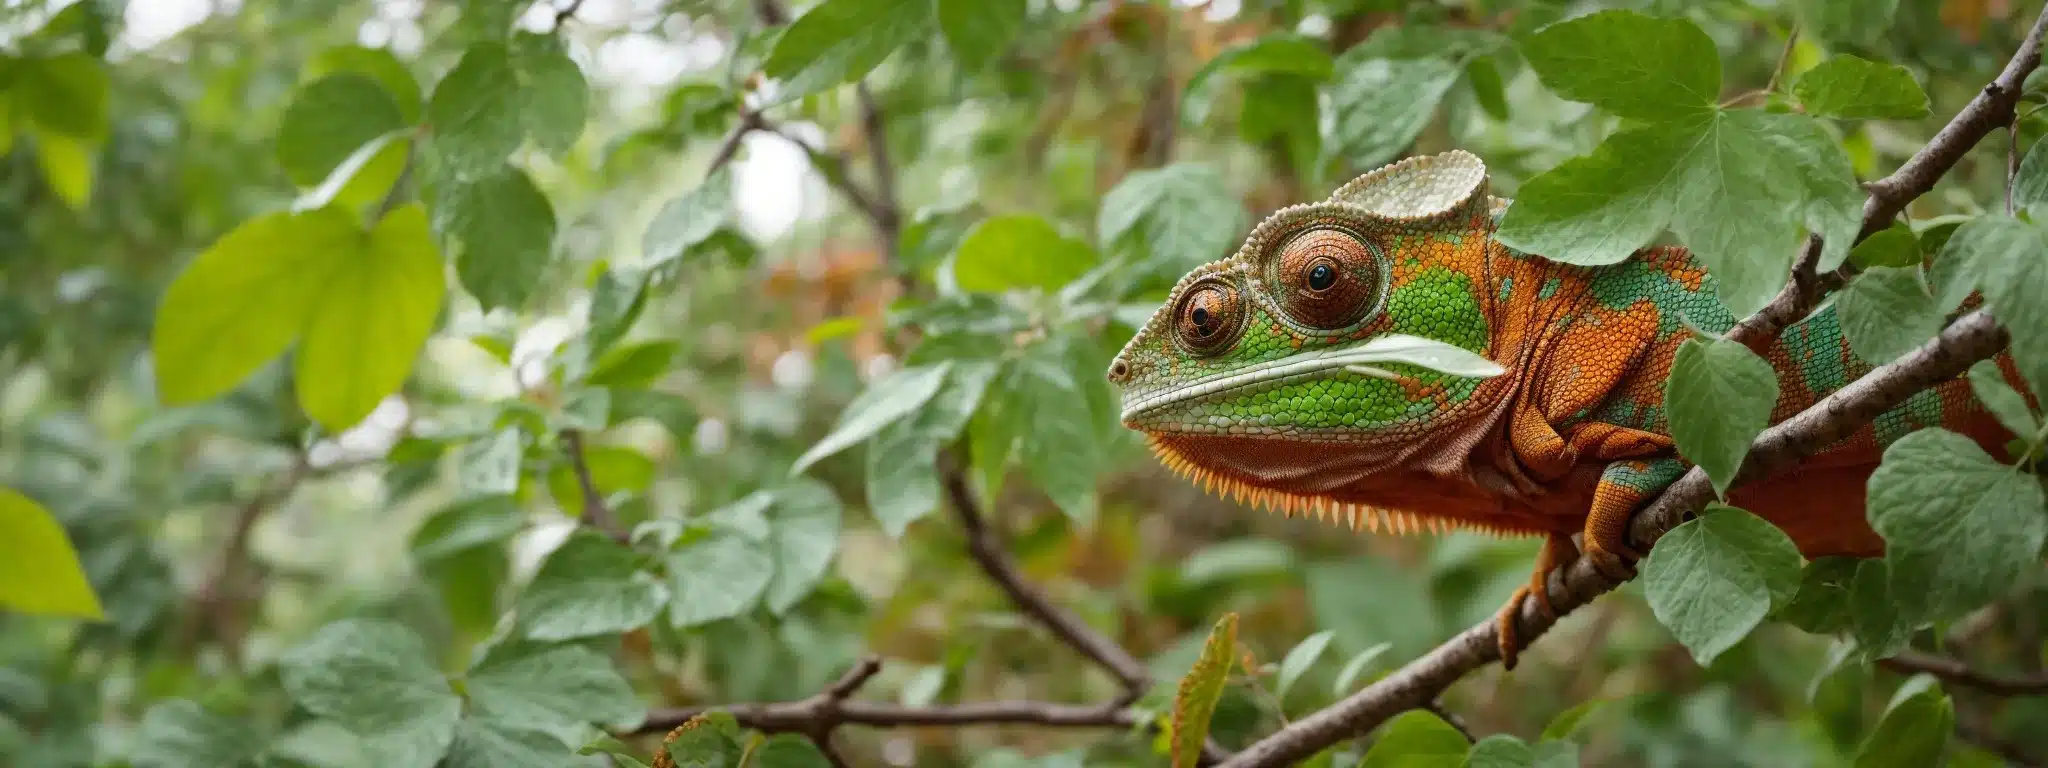 A Chameleon Perched On A Branch, Its Colors Blending Seamlessly With The Surrounding Foliage.